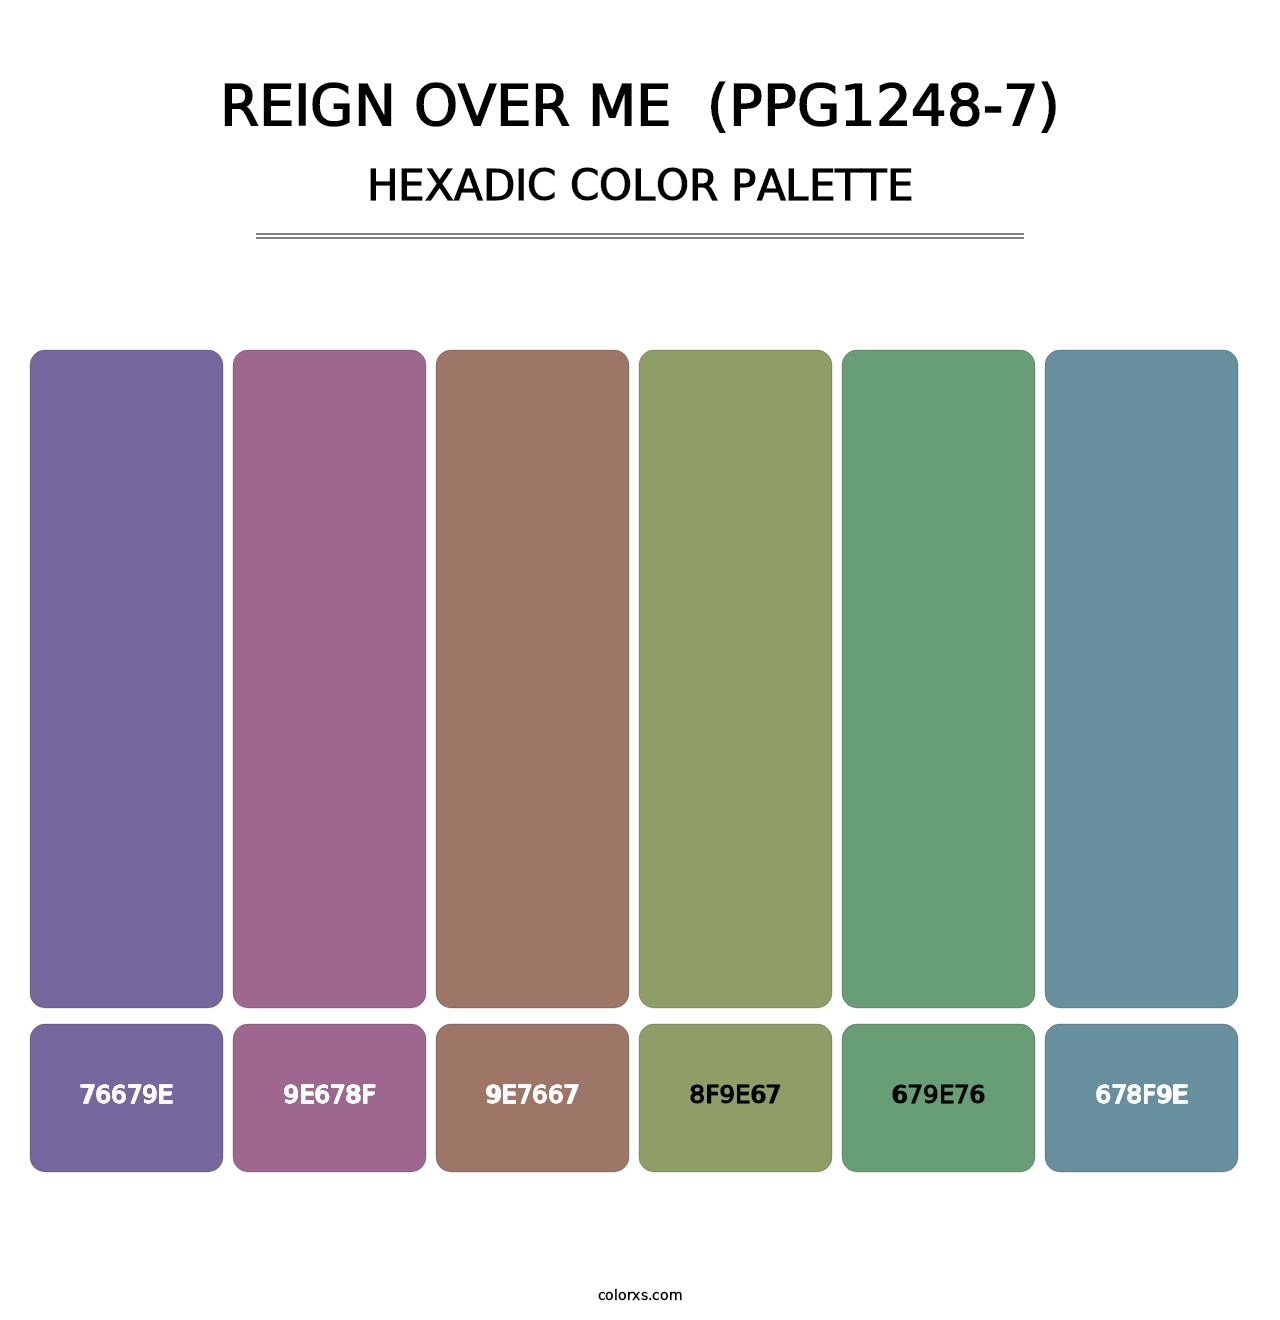 Reign Over Me  (PPG1248-7) - Hexadic Color Palette